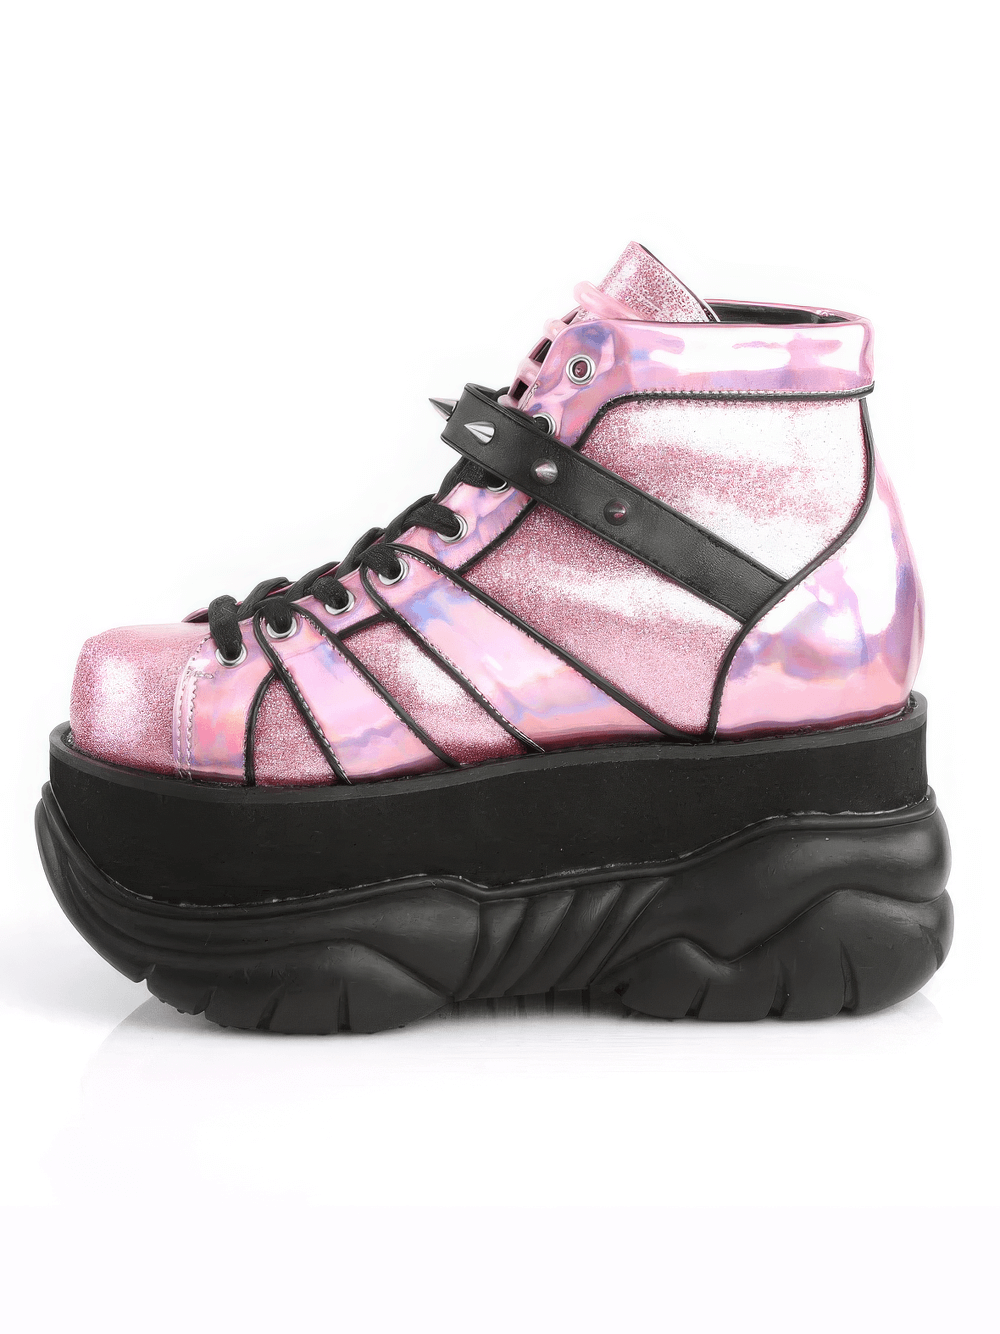 DEMONIA Pink Glitter Platform Ankle Boots with Cone Studs